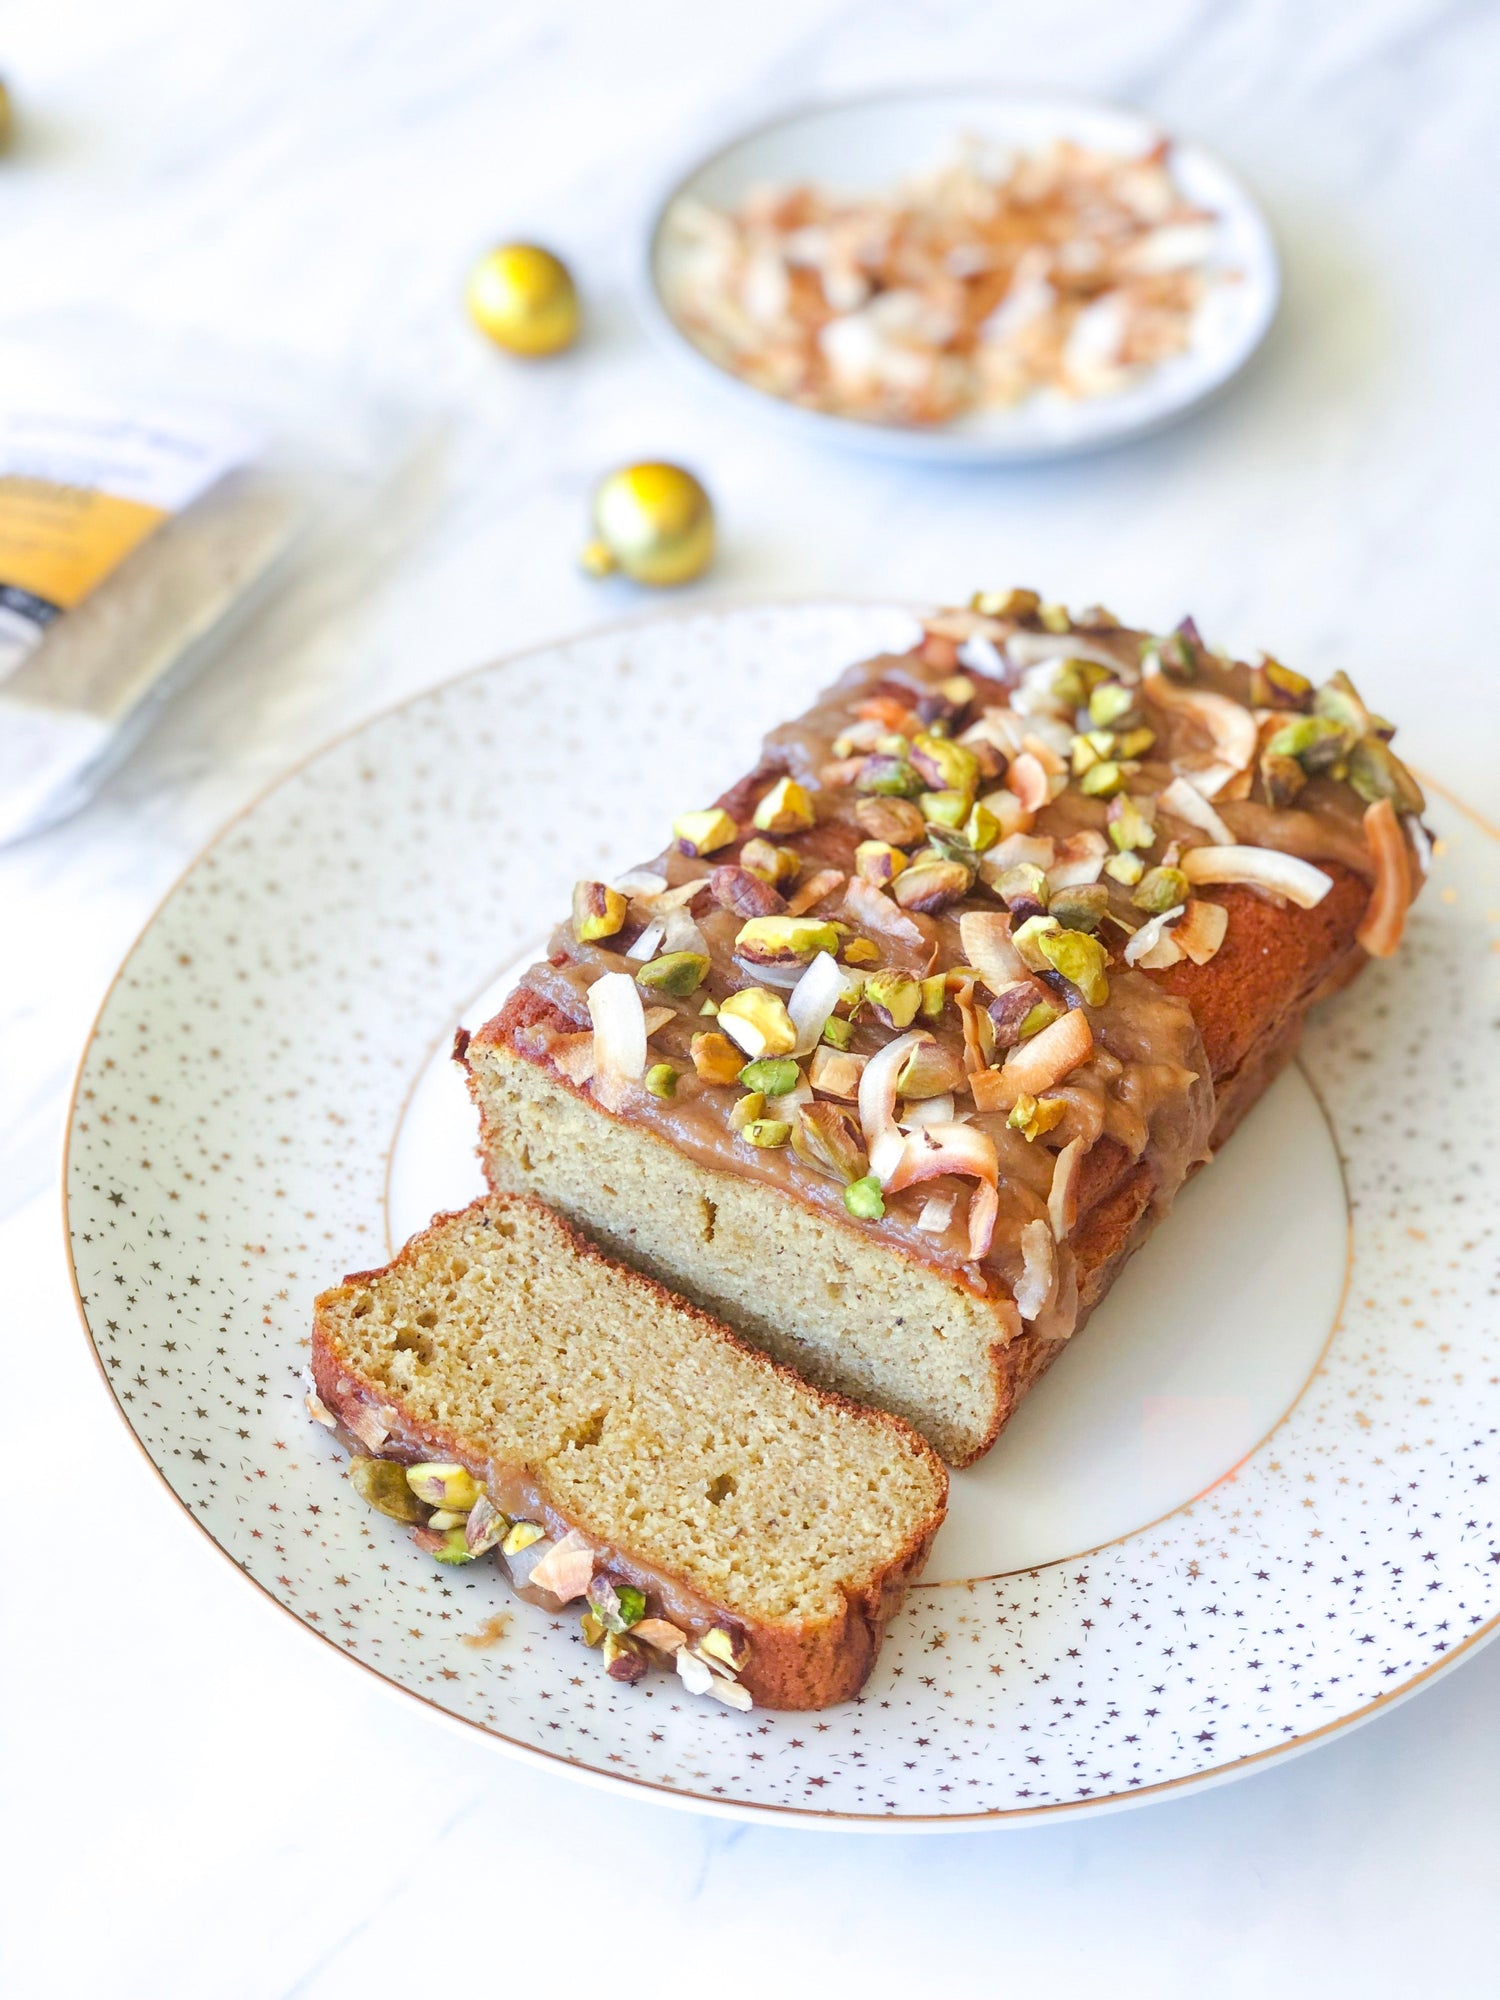 Banting Blvd's Gingerbread Loaf with Tahini Drizzle recipe